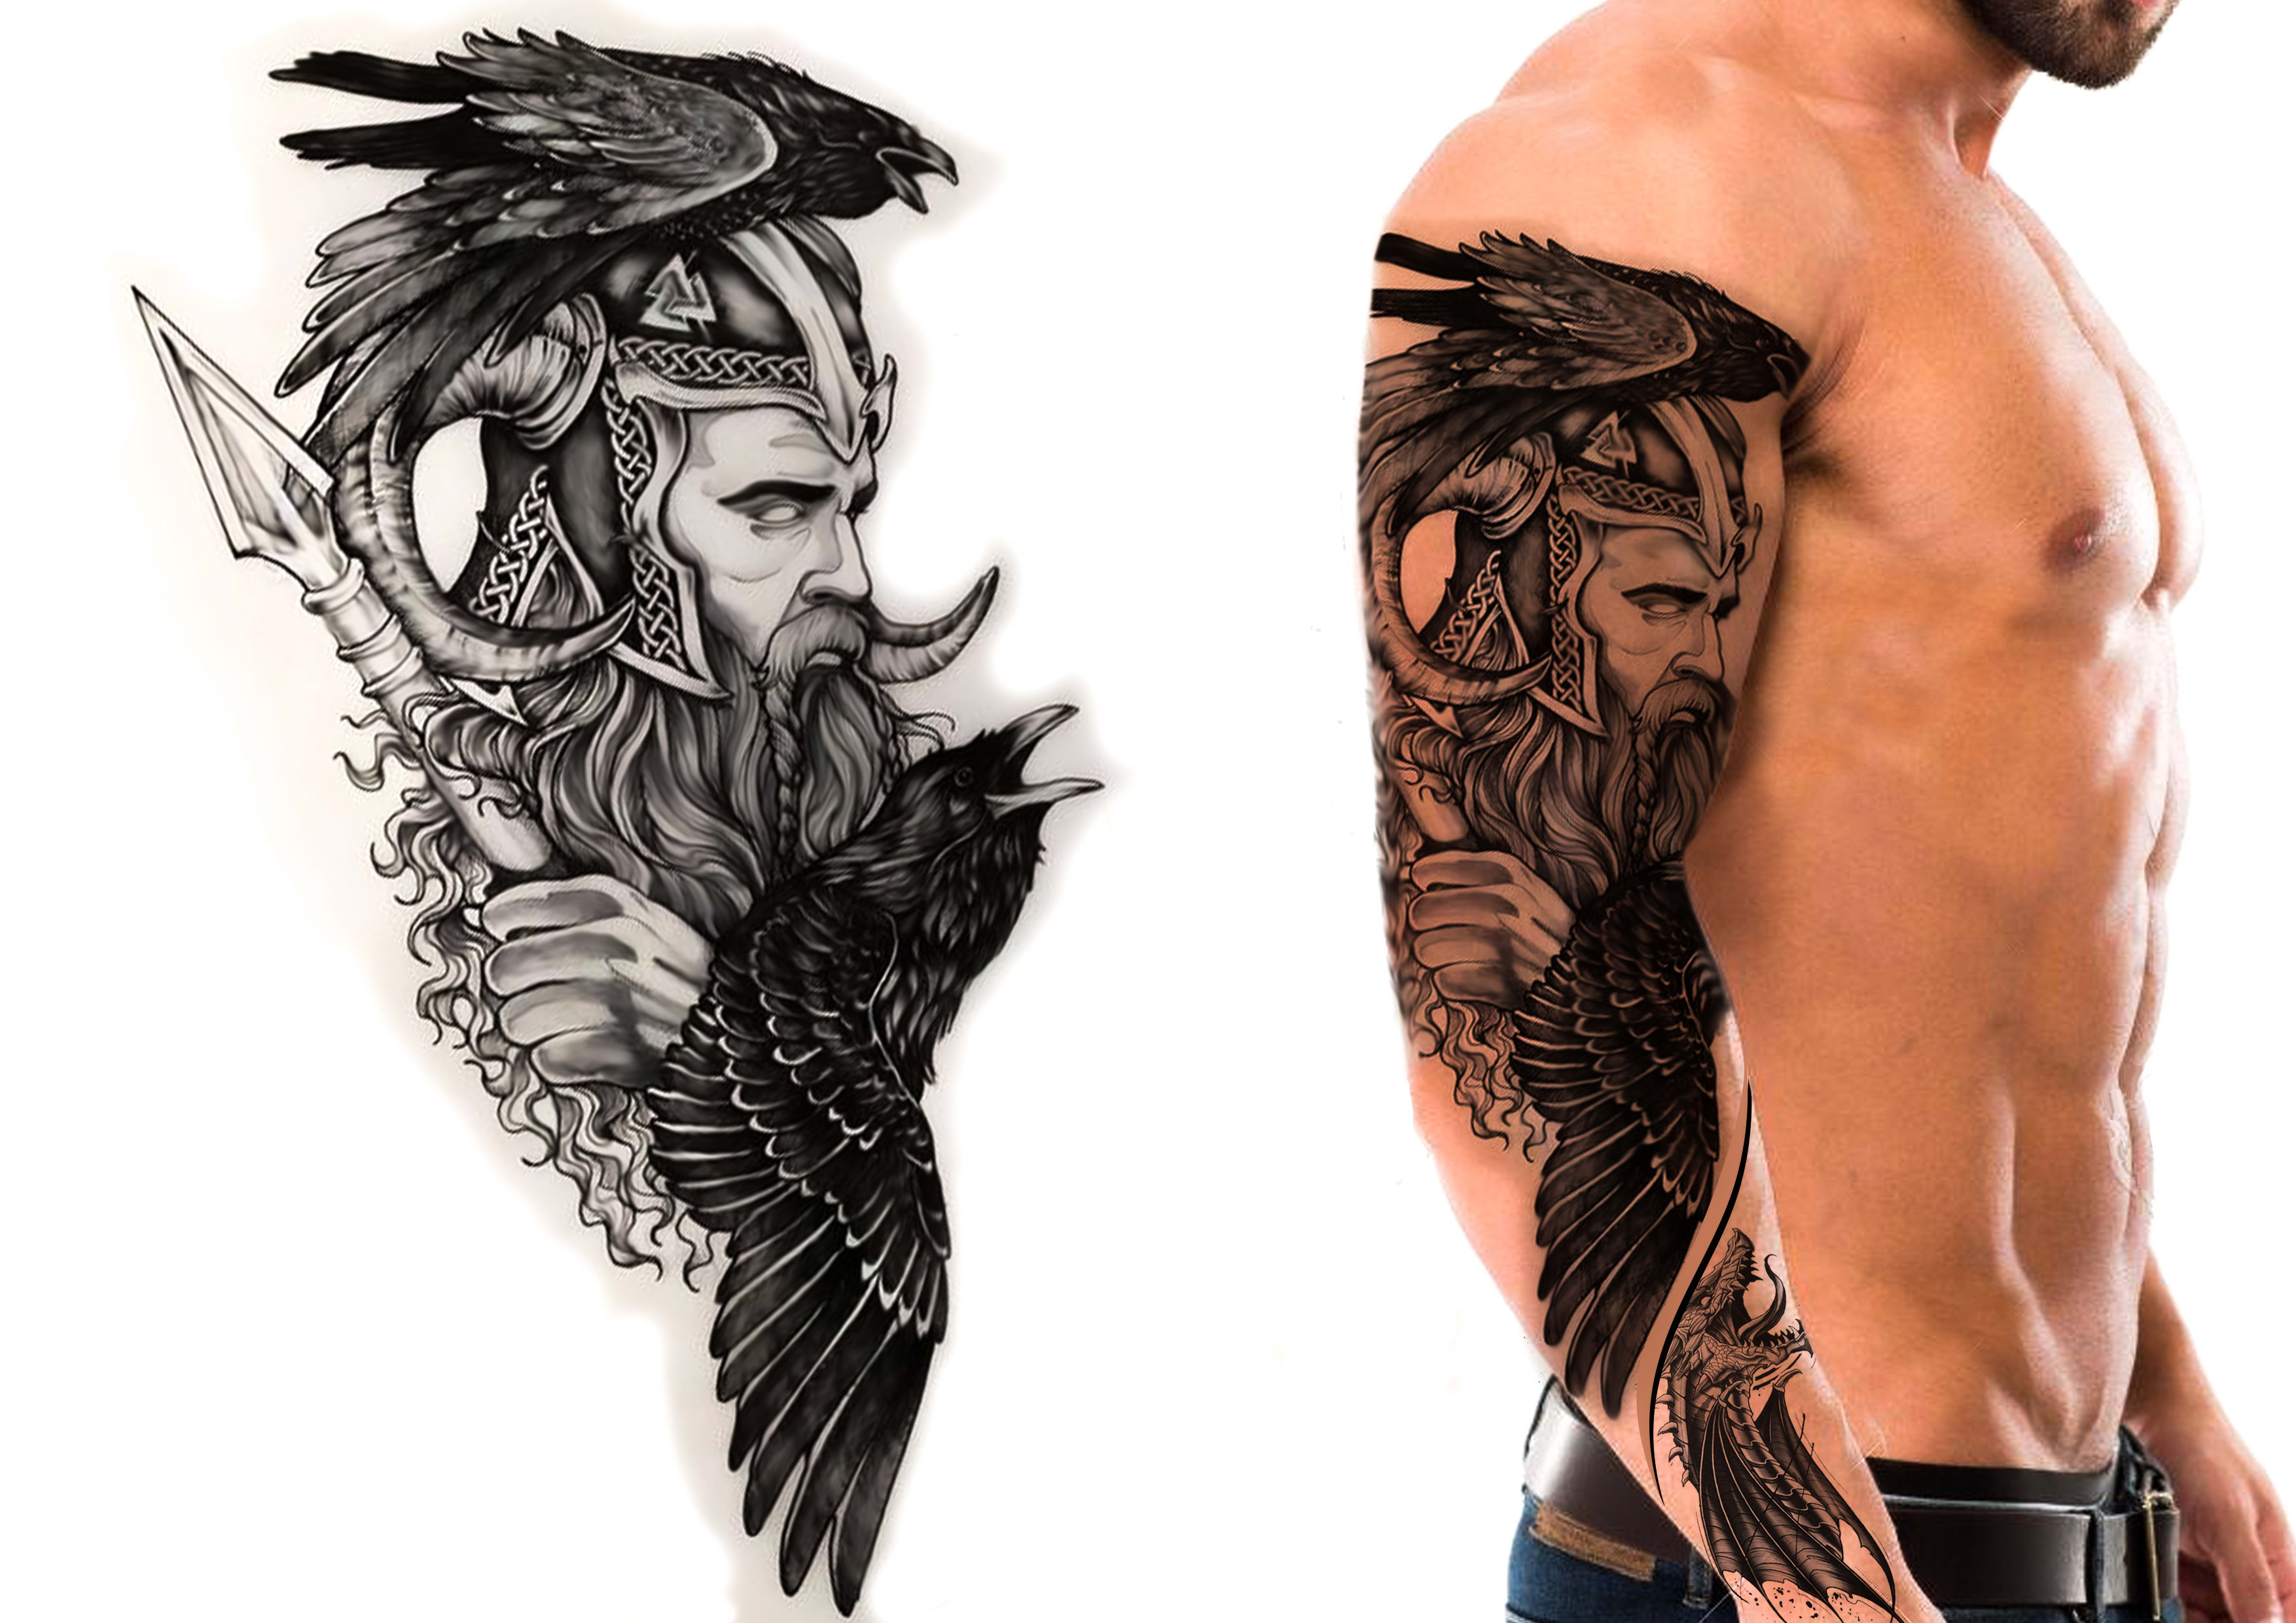 55 Awesome Sleeve Tattoos Ideas and designs For Men And Women